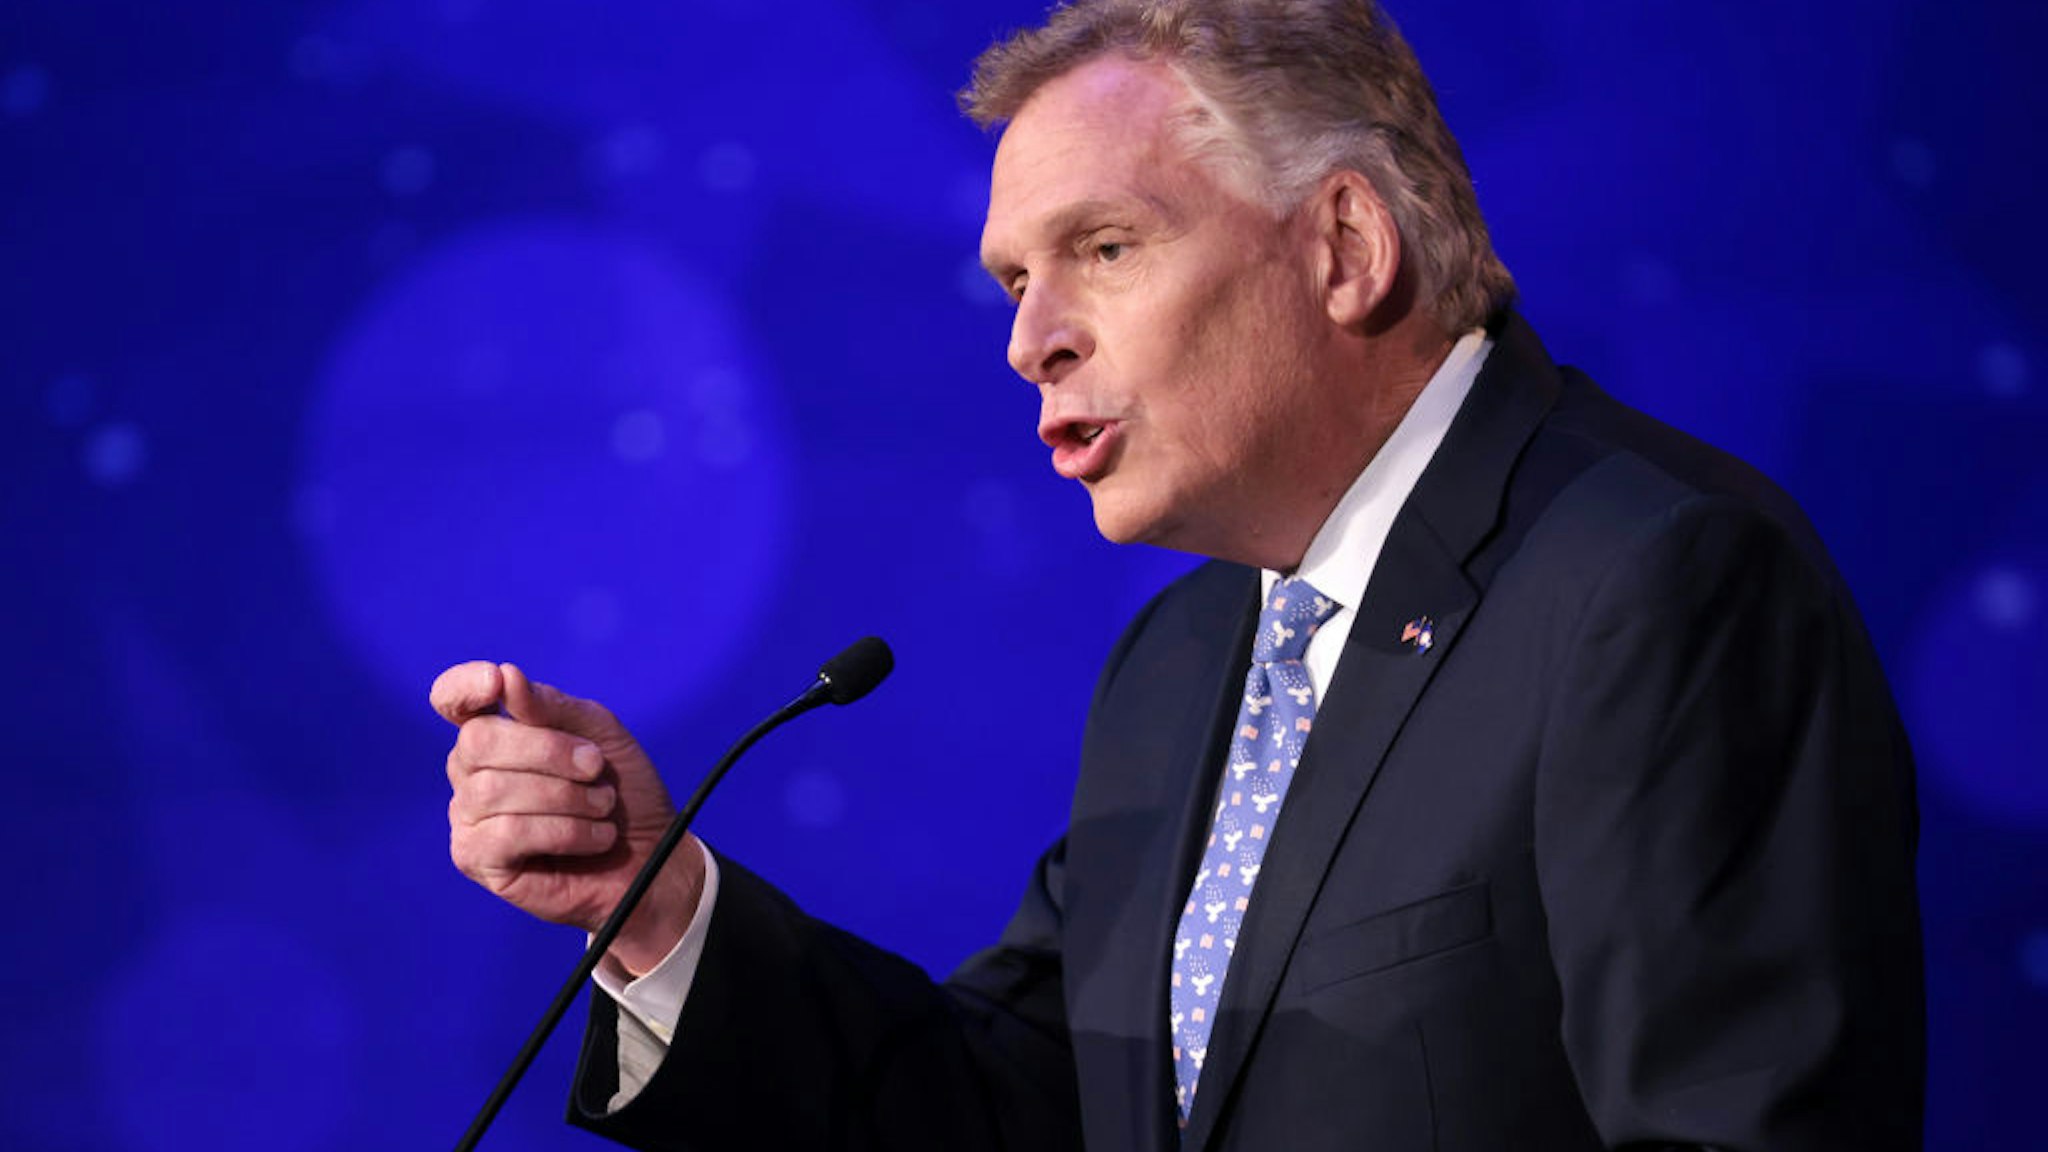 Former Virginia Gov. Terry McAuliffe (D-VA) answers a question in a debate with Republican gubernatorial candidate Glenn Youngkin hosted by the Northern Virginia Chamber of Commerce September 28, 2021 in Alexandria, Virginia. The gubernatorial election is November 2.